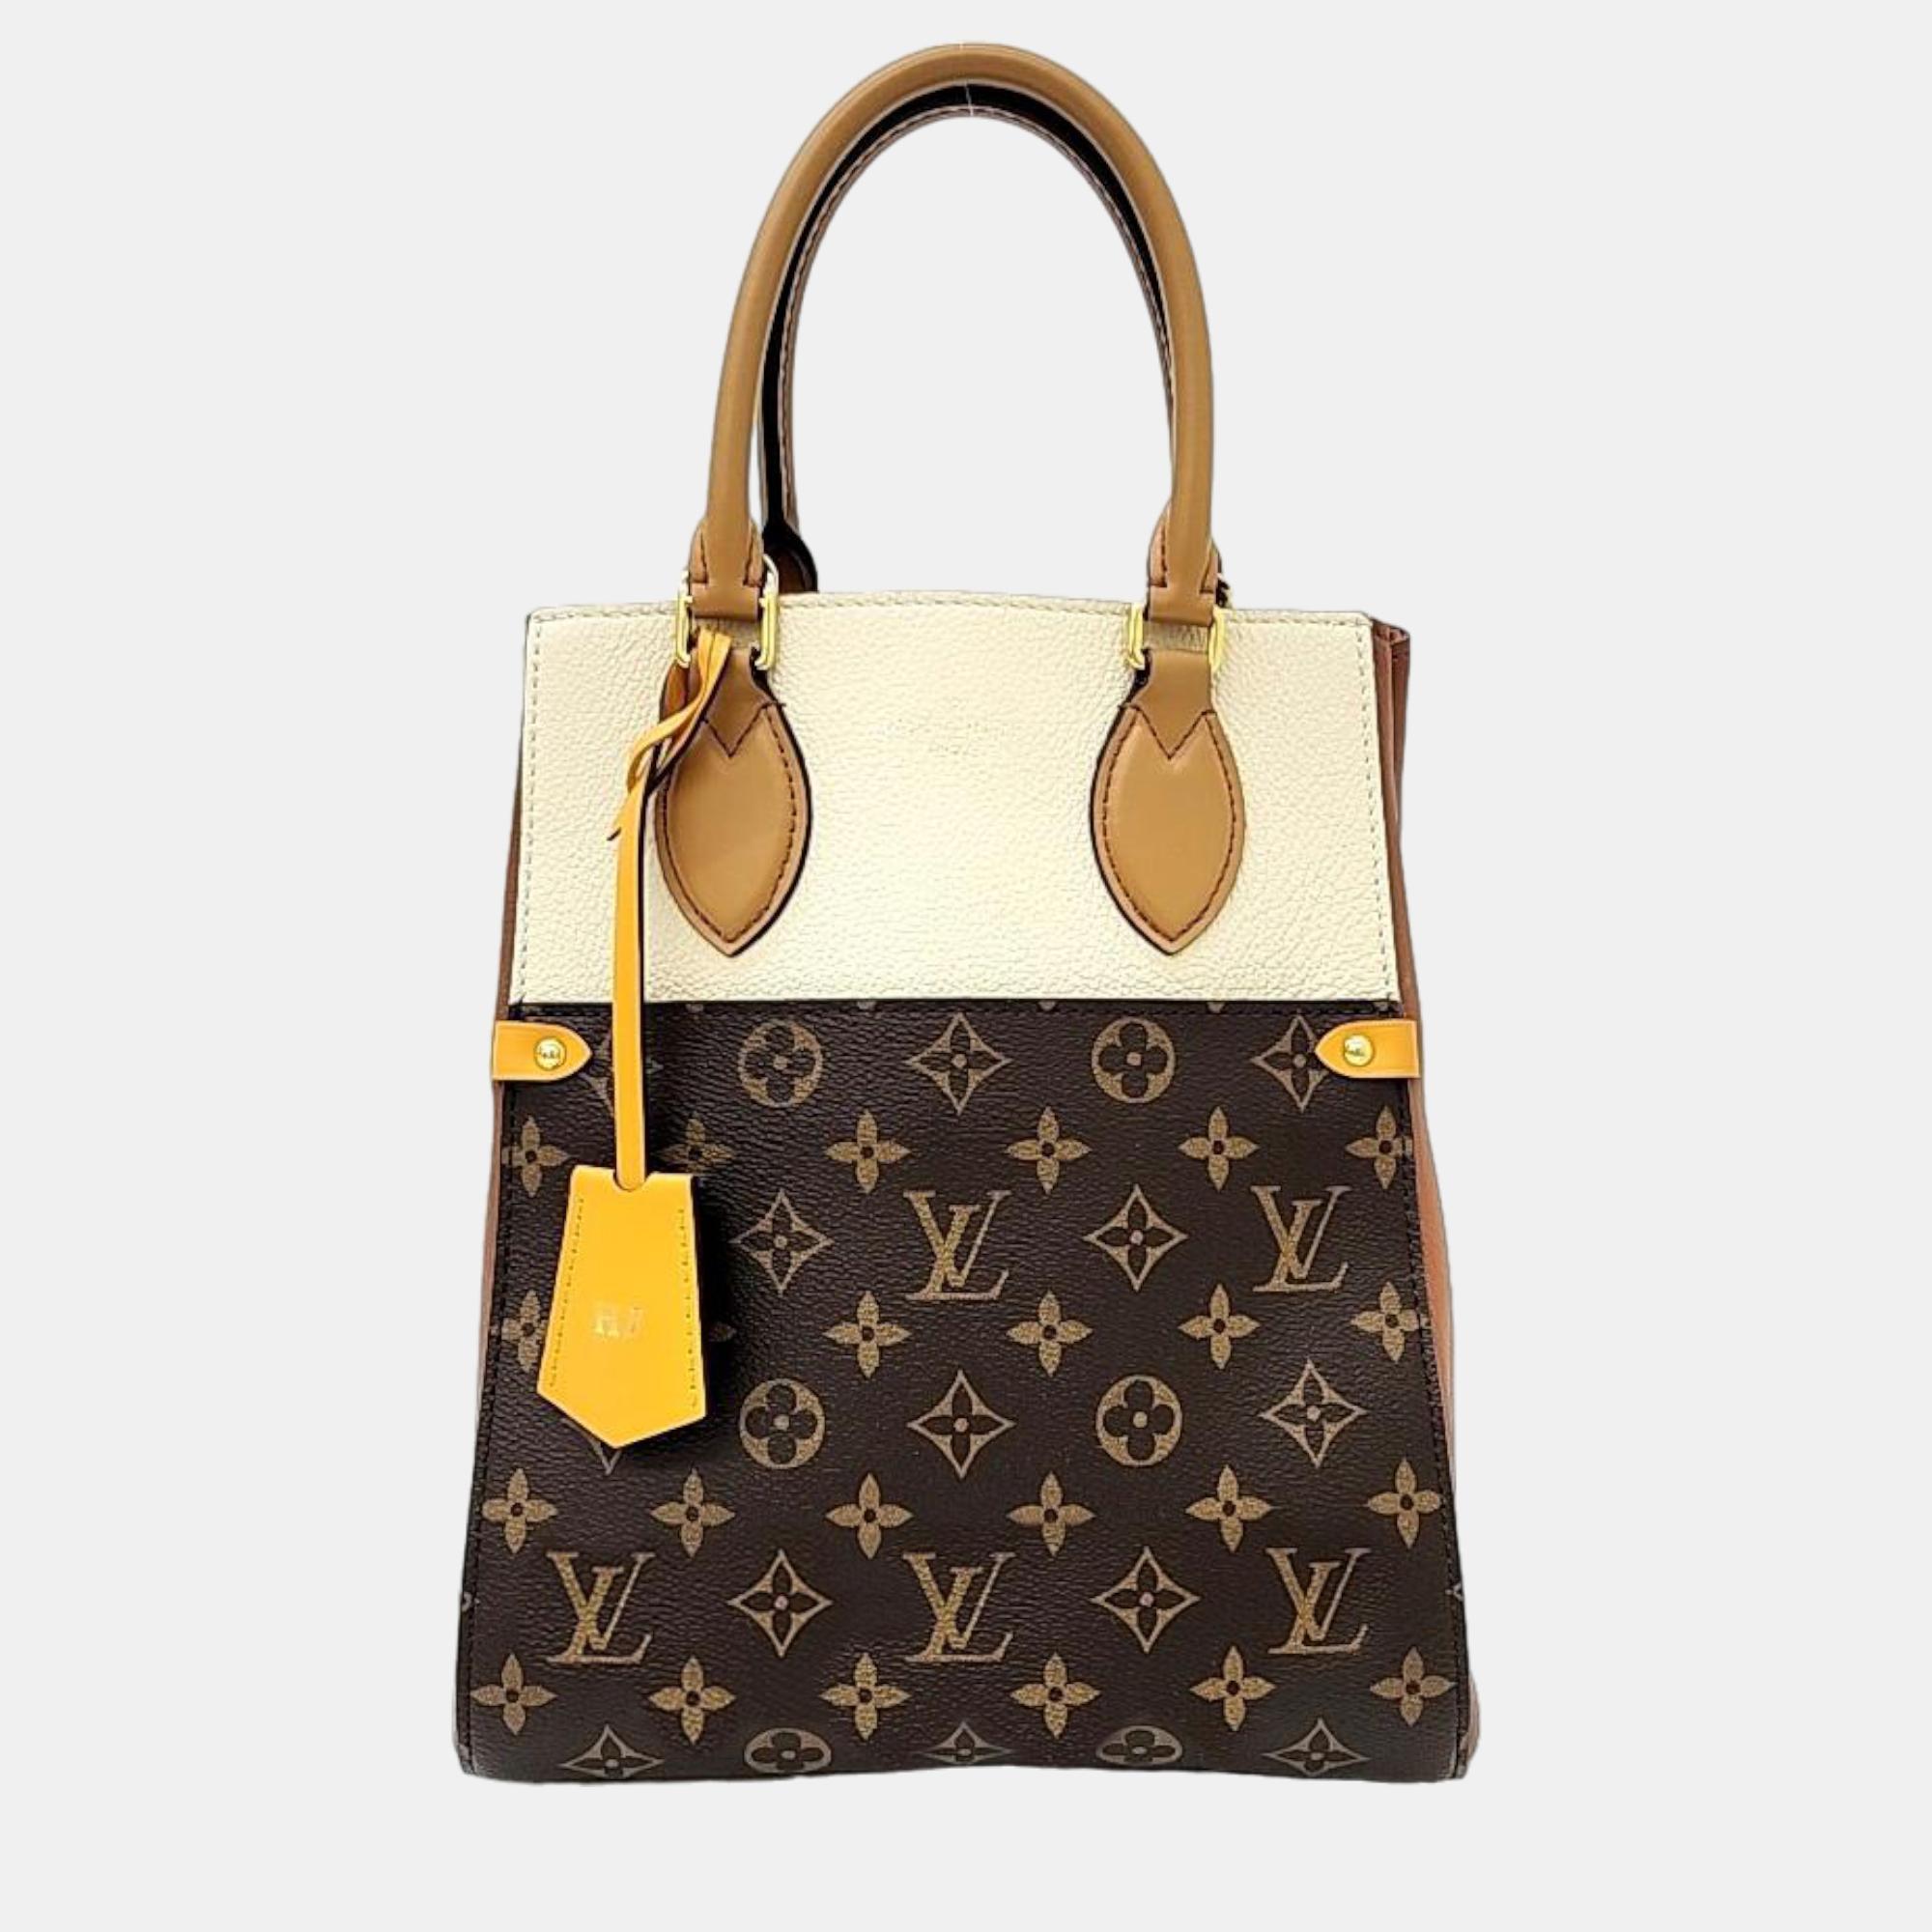 A classic handbag comes with the promise of enduring appeal boosting your style time and again. This LV bag is one such creation. It's a fine purchase.